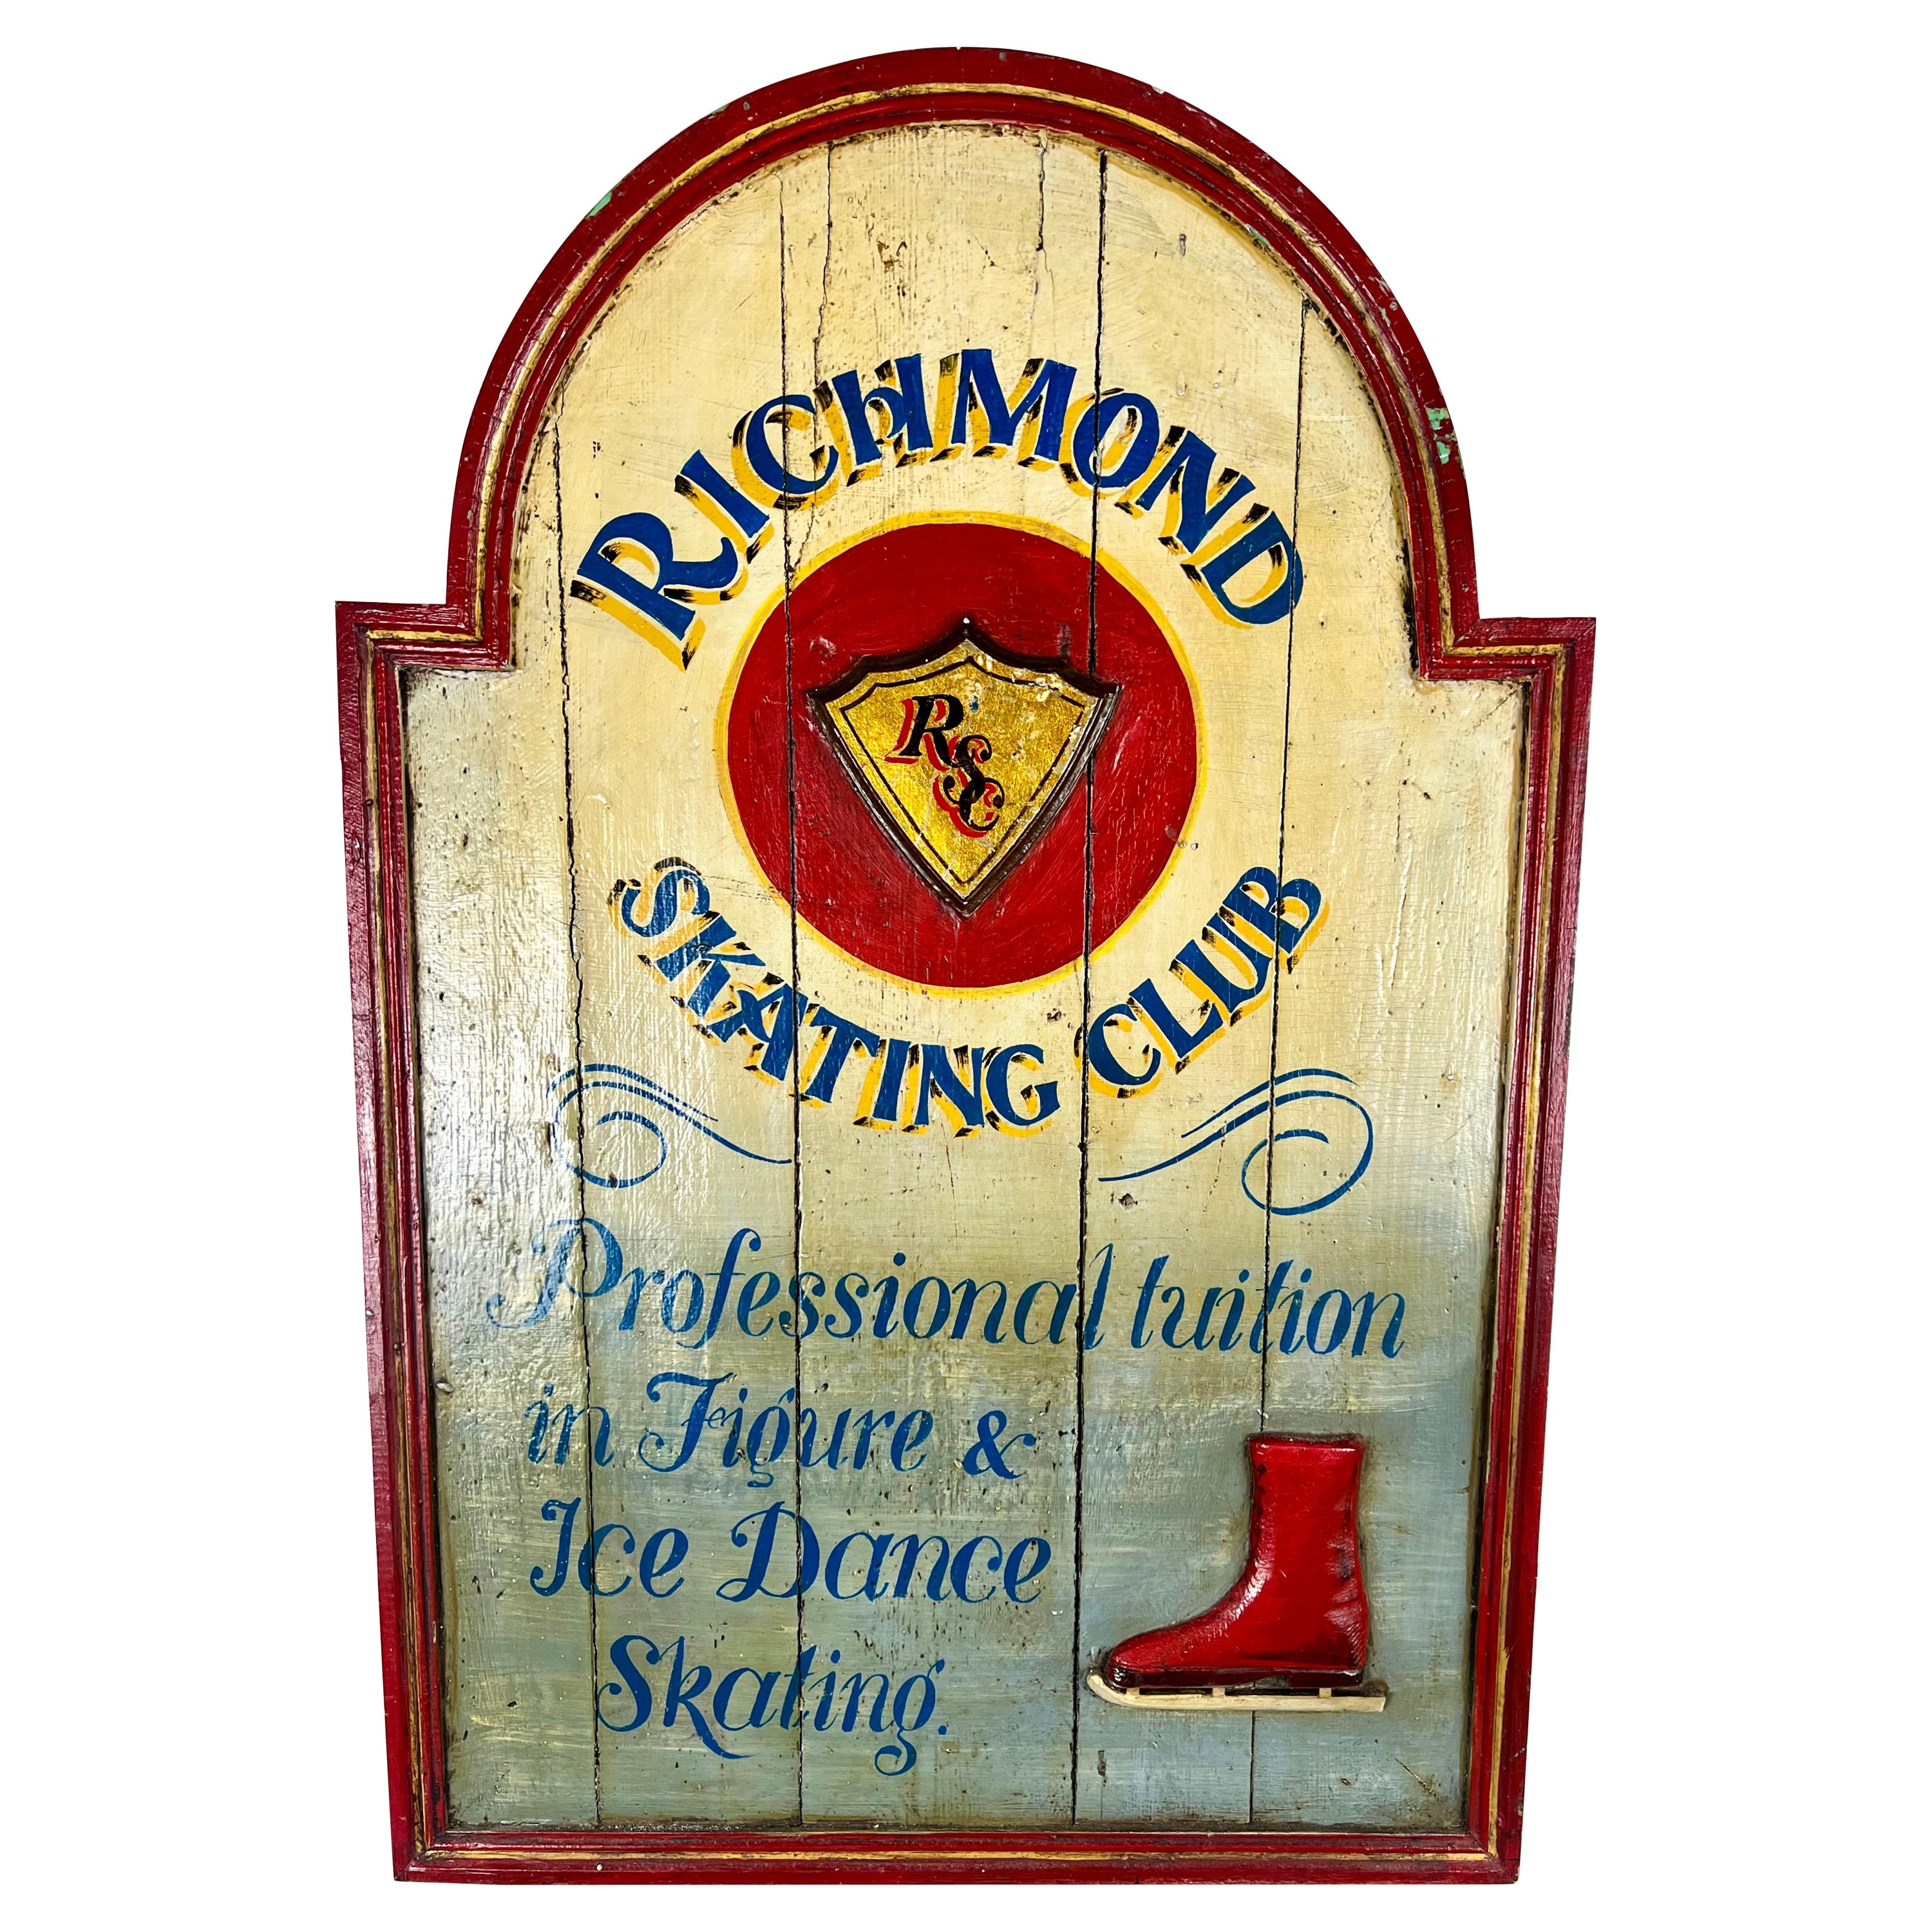 Antique Sign for the "Richmond Skating Club"-early 20th century For Sale